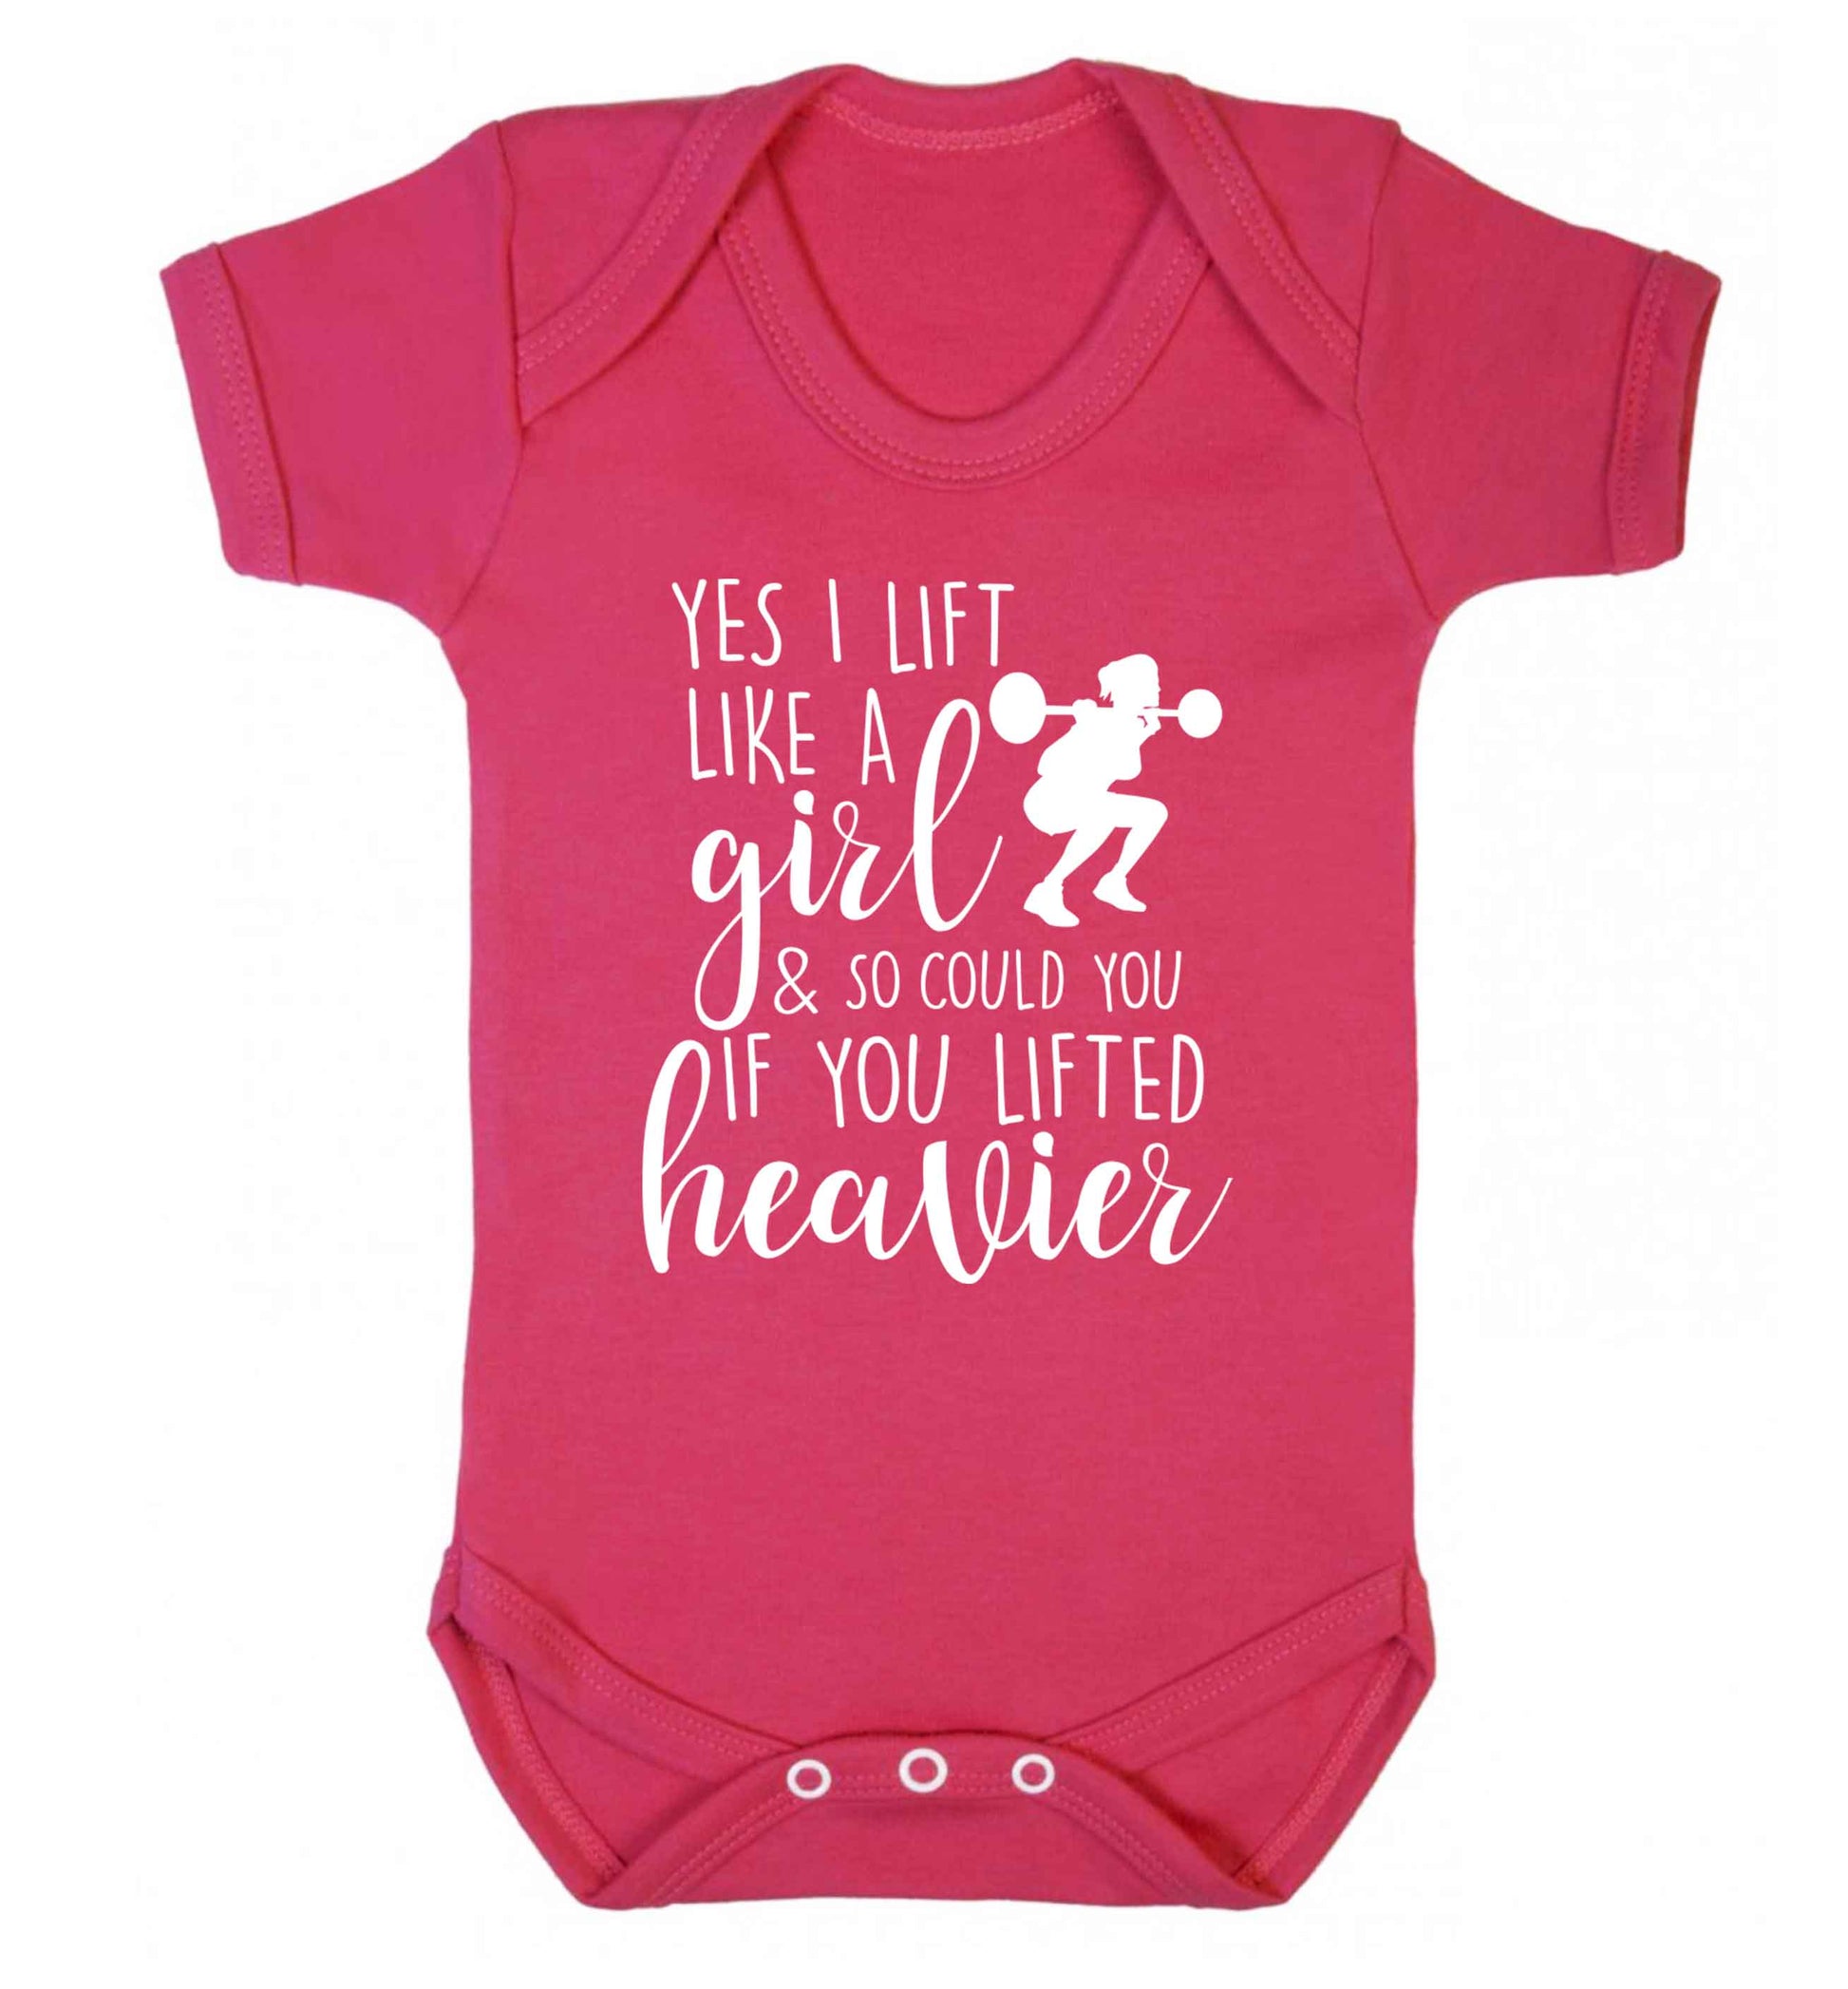 Yes I lift like a girl and so could you if you lifted heavier Baby Vest dark pink 18-24 months